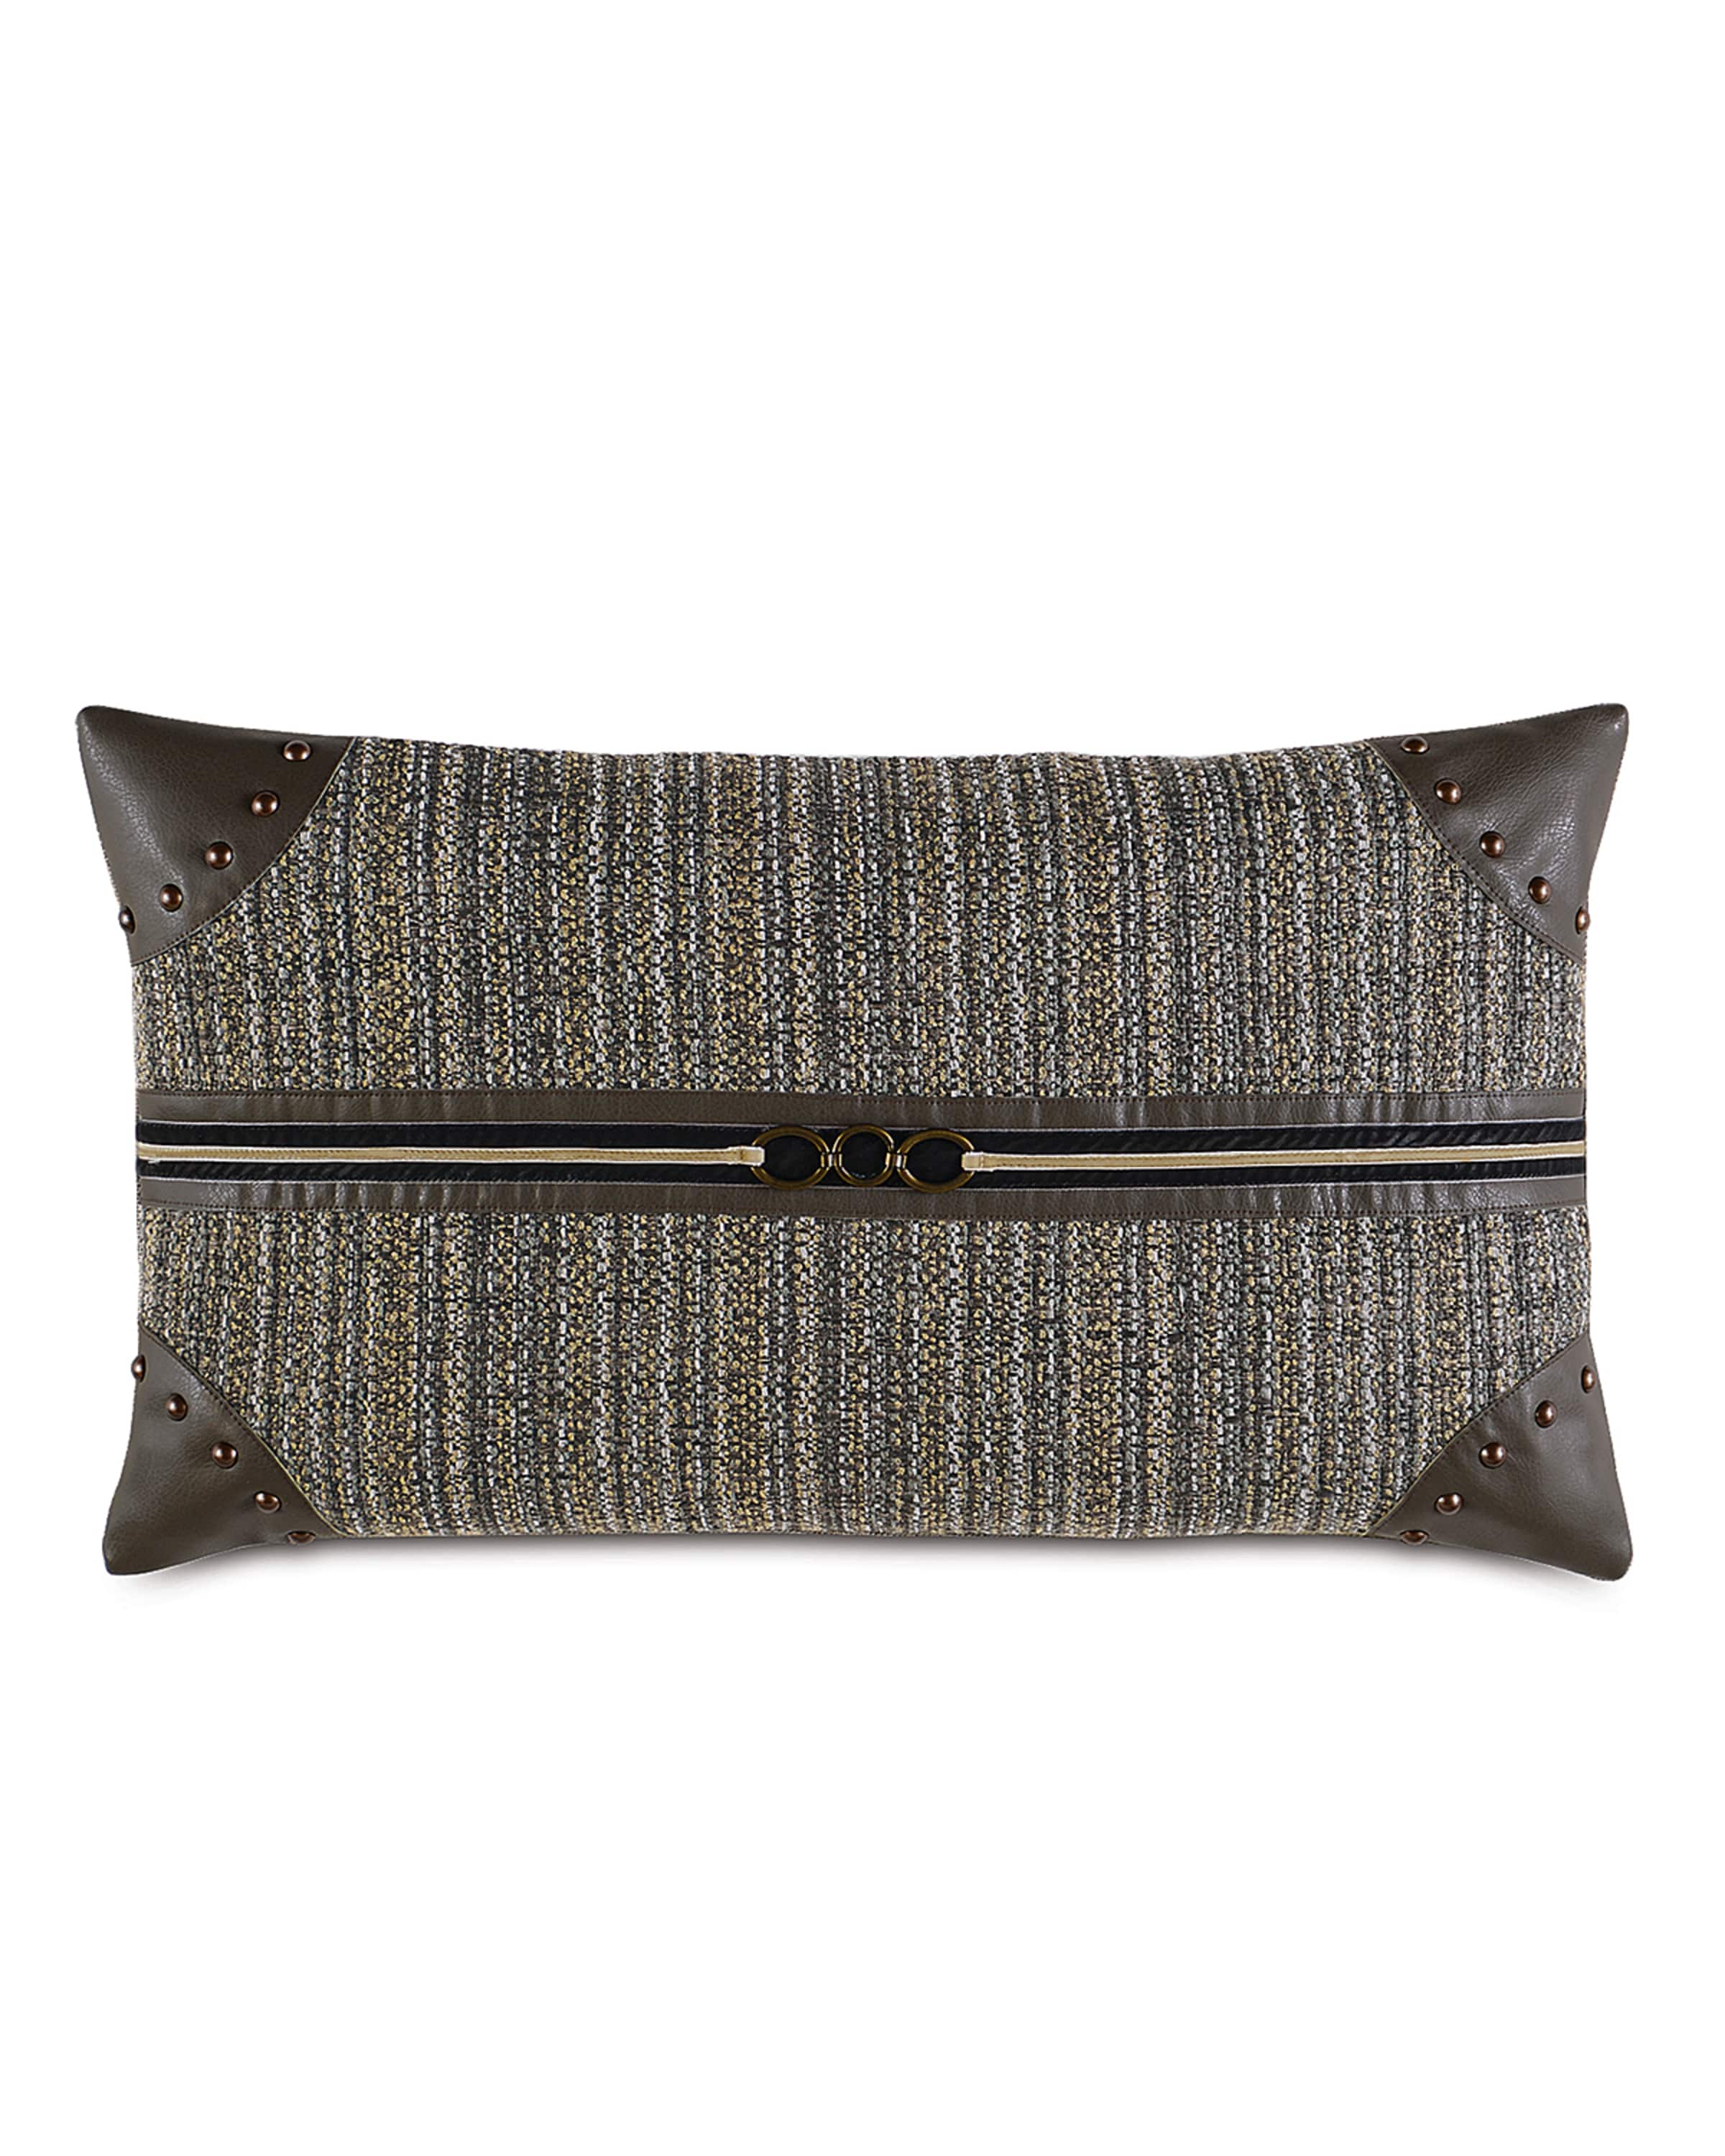 Eastern Accents Reign Bolster Pillow